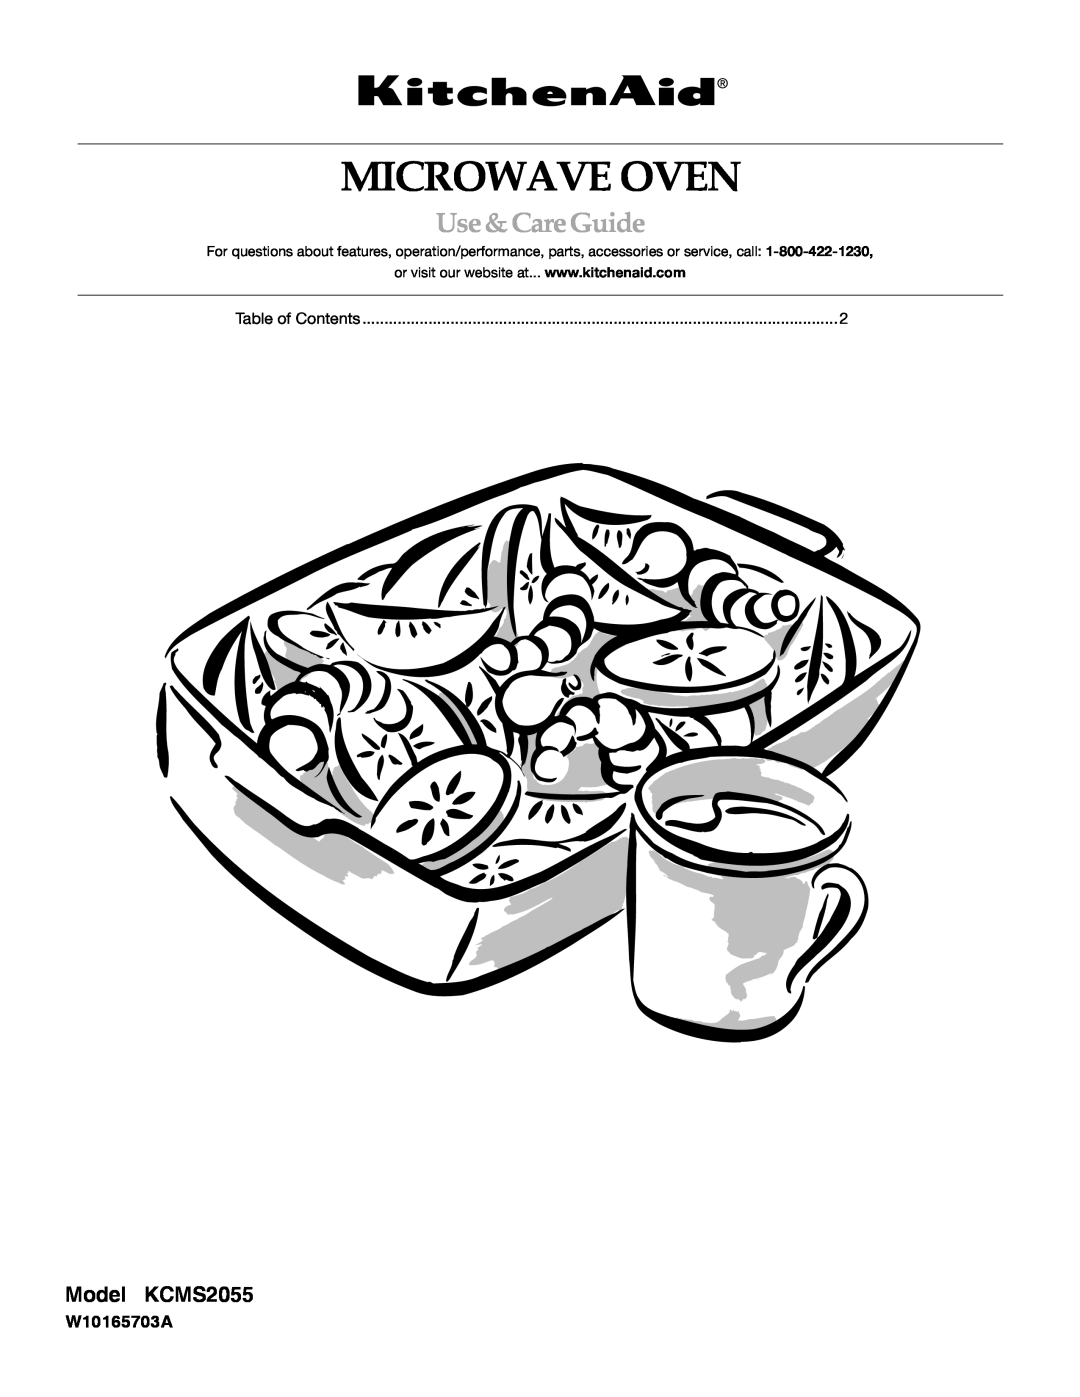 KitchenAid KCMS2055SSS manual Model KCMS2055, Microwave Oven, Use&CareGuide, W10165703A 